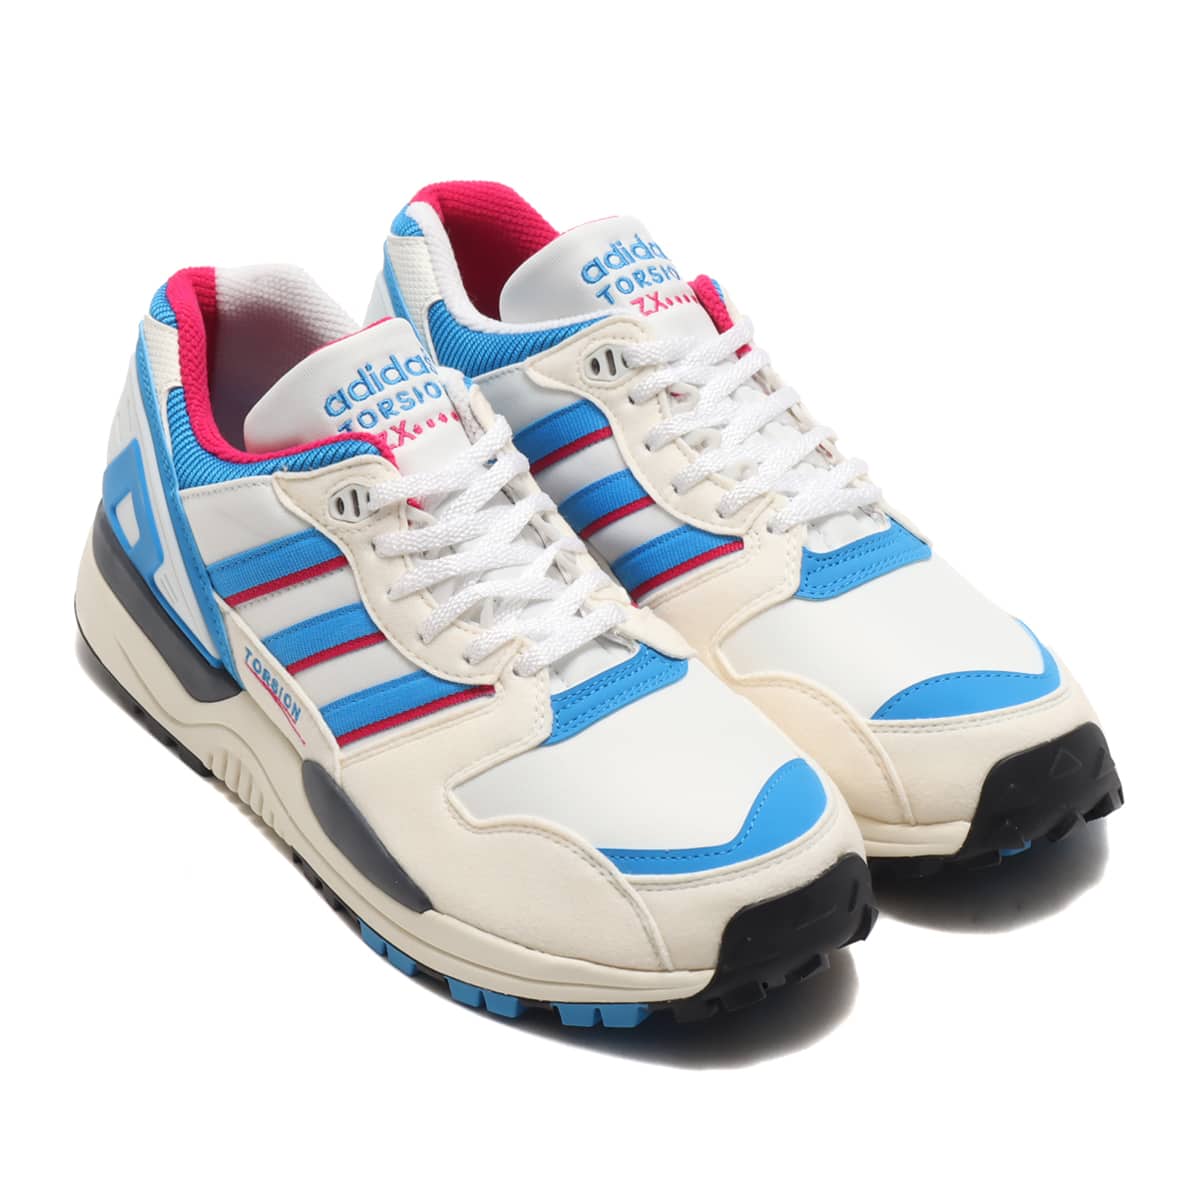 adidas ZX 0000 EVOLUTION CRYSTAL WHITE/BRIGHT BLUE/BOLD PINK 21SS-S